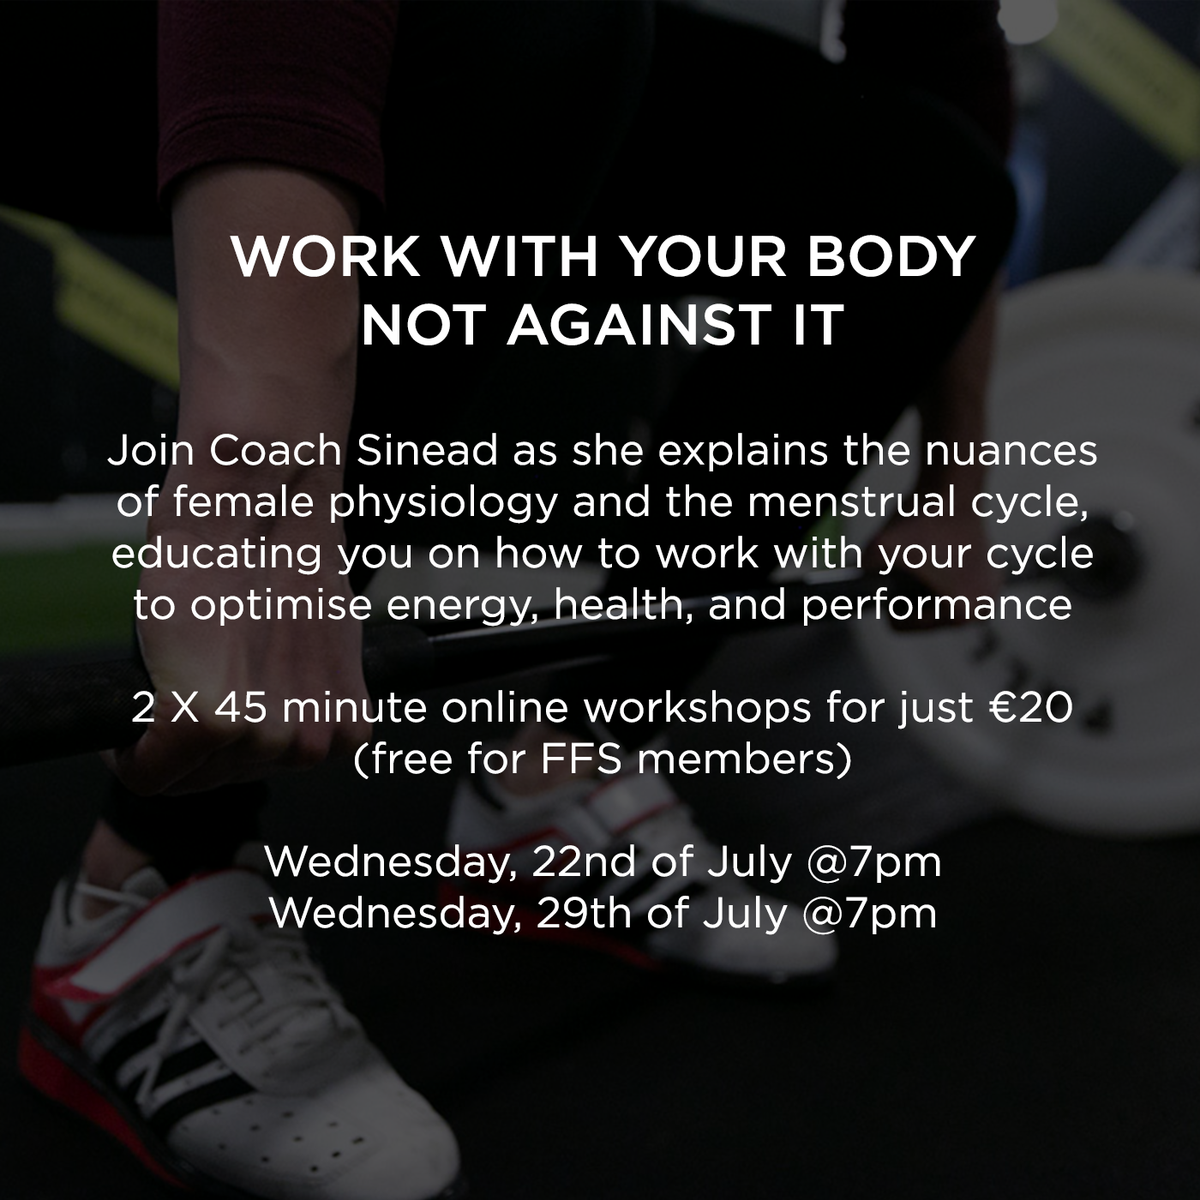 Want to work with your body, not against it?⁠
⁠
Click the link below or go to the events tab of your FFS App to sign up⁠:
bit.ly/2Wq0cga
⁠
@gowiththeflow_workwithyourbody #femalephysiology #workwithyourcycle #menstrualcycleawareness #womenarenotsmallmen